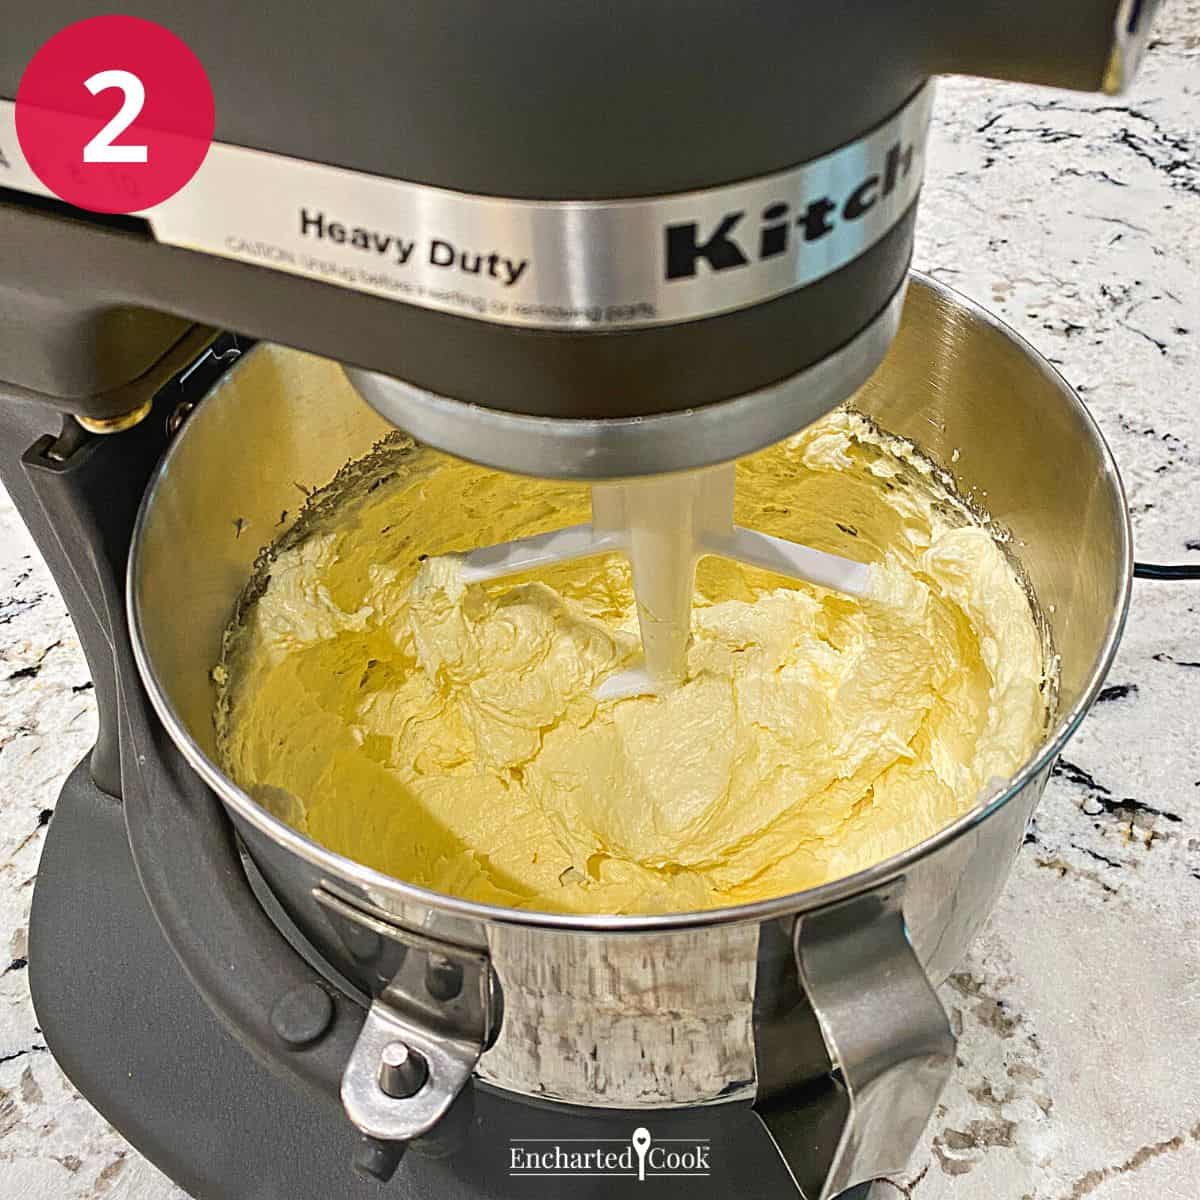 Process Photo 2 - Eggs and flavorings are added to the butter and sugar creamed mixture and beaten until light and fluffy in the bowl of a large stand mixer.